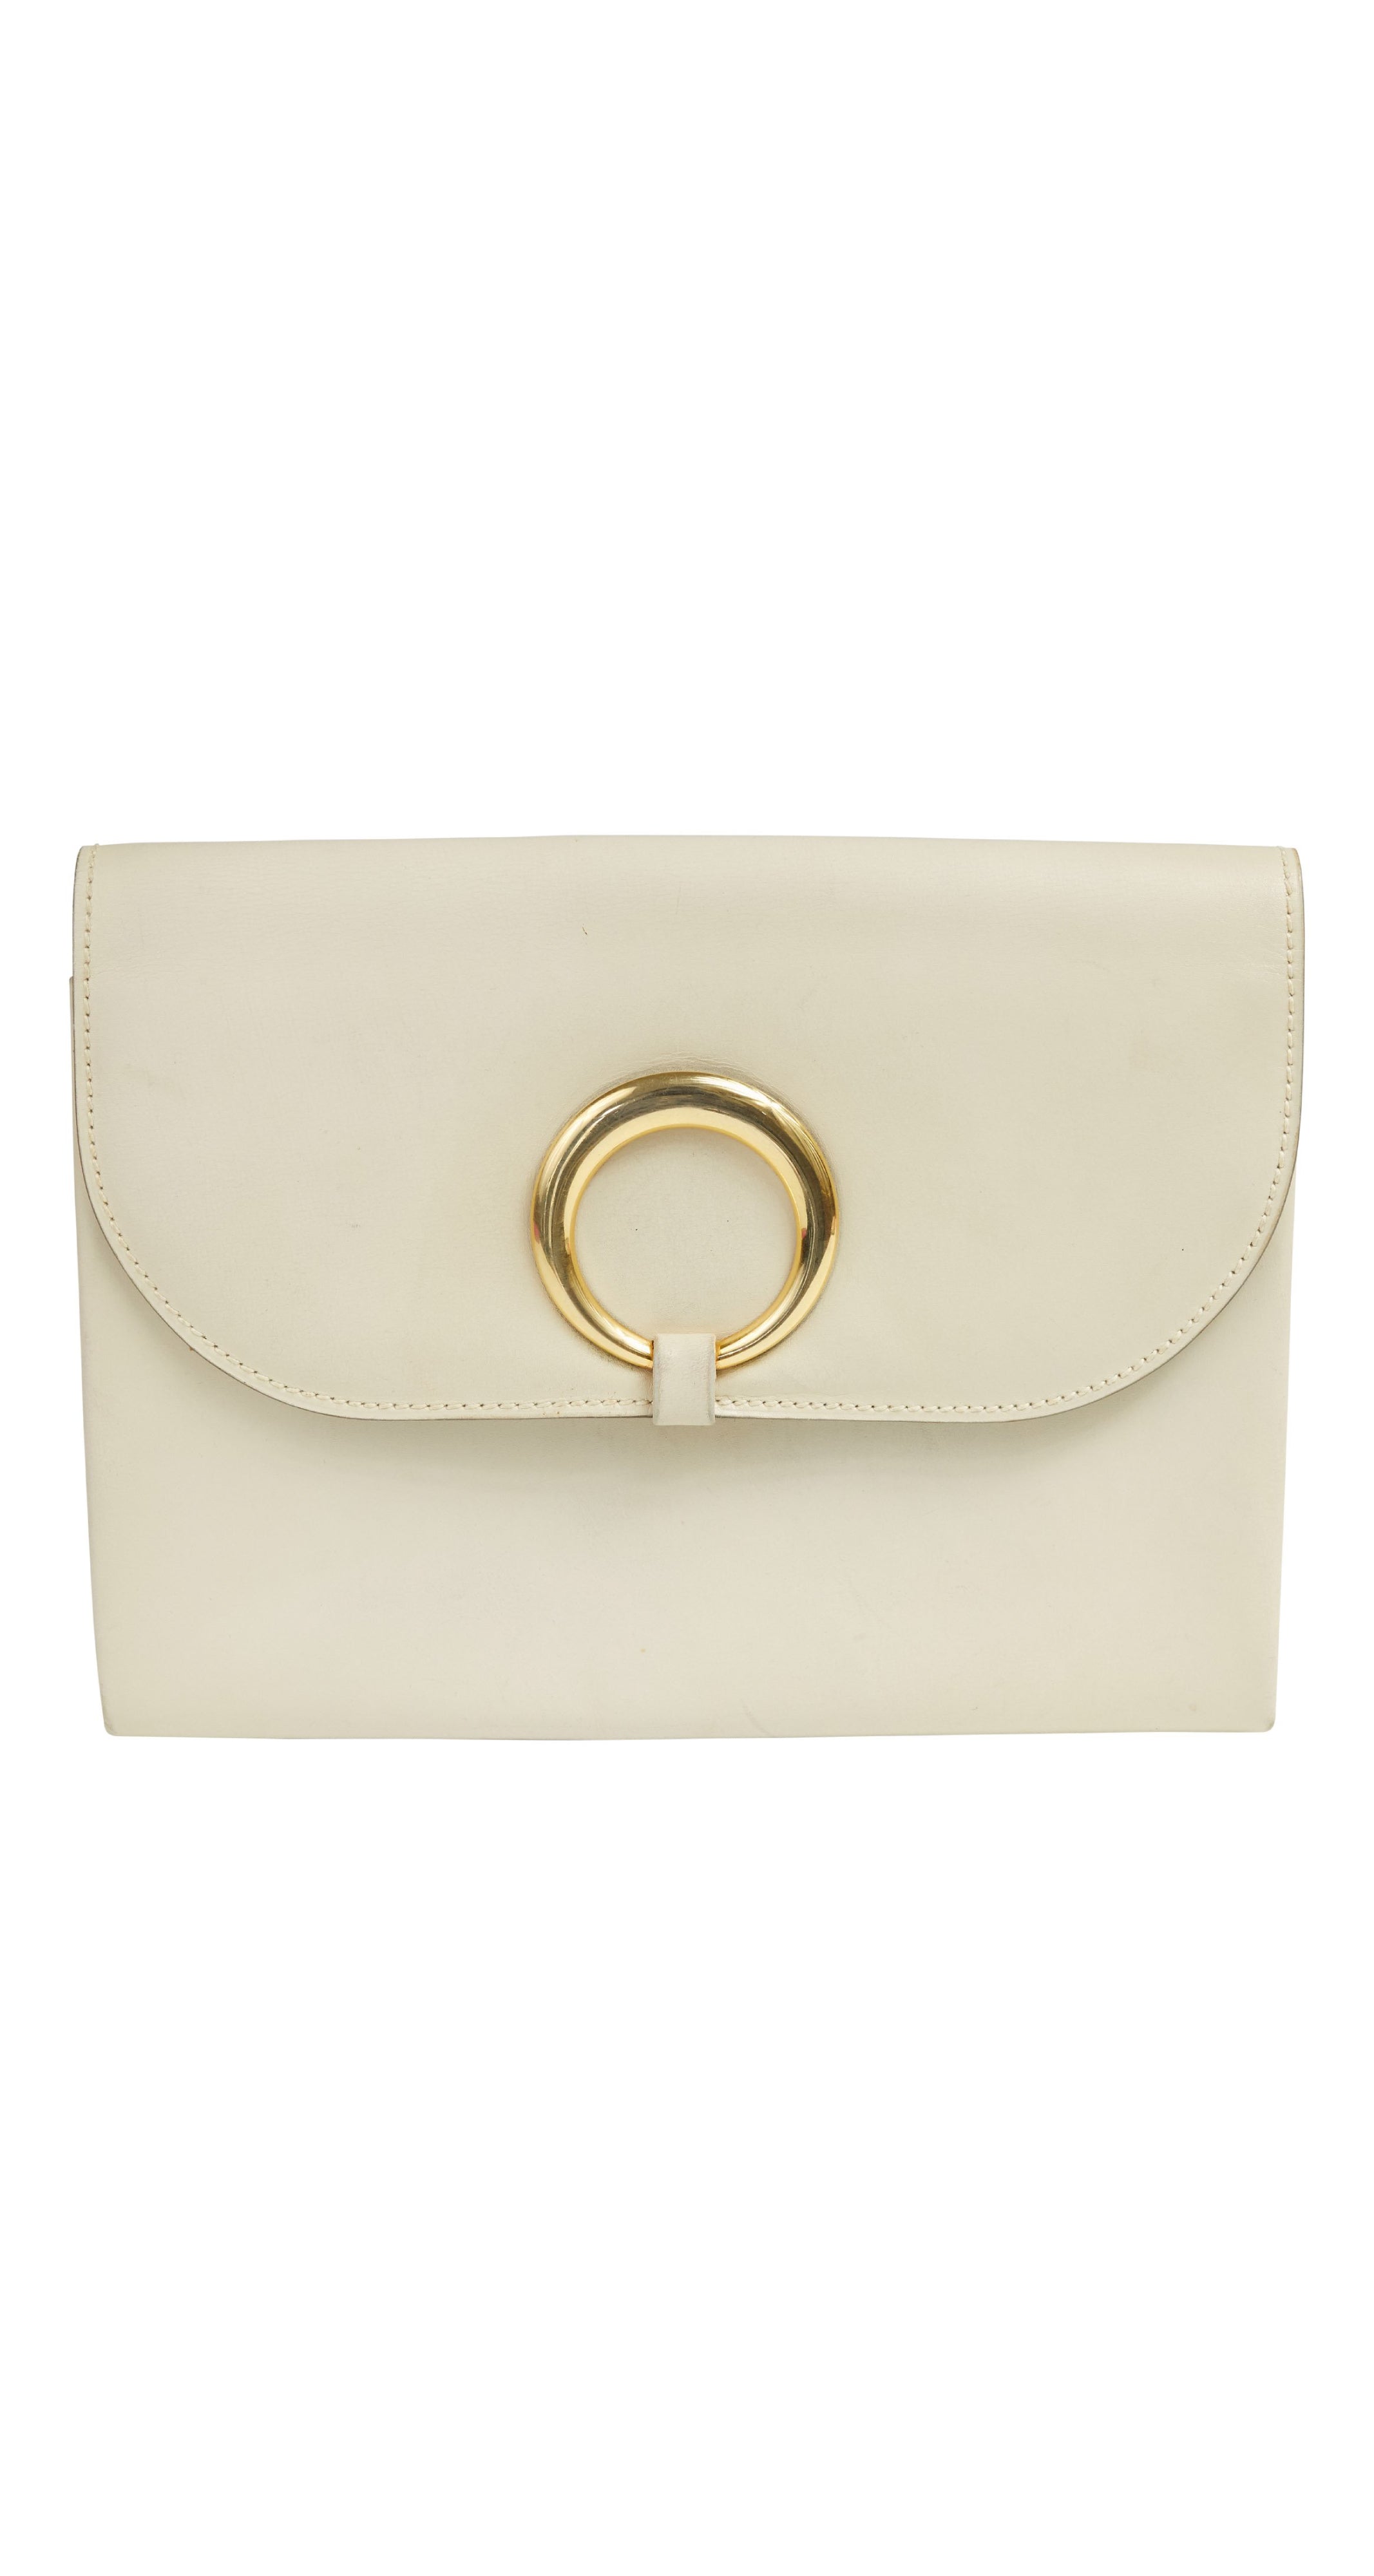 Christian Dior 1970s Ivory Genuine Leather Gold Hoop Clutch ...